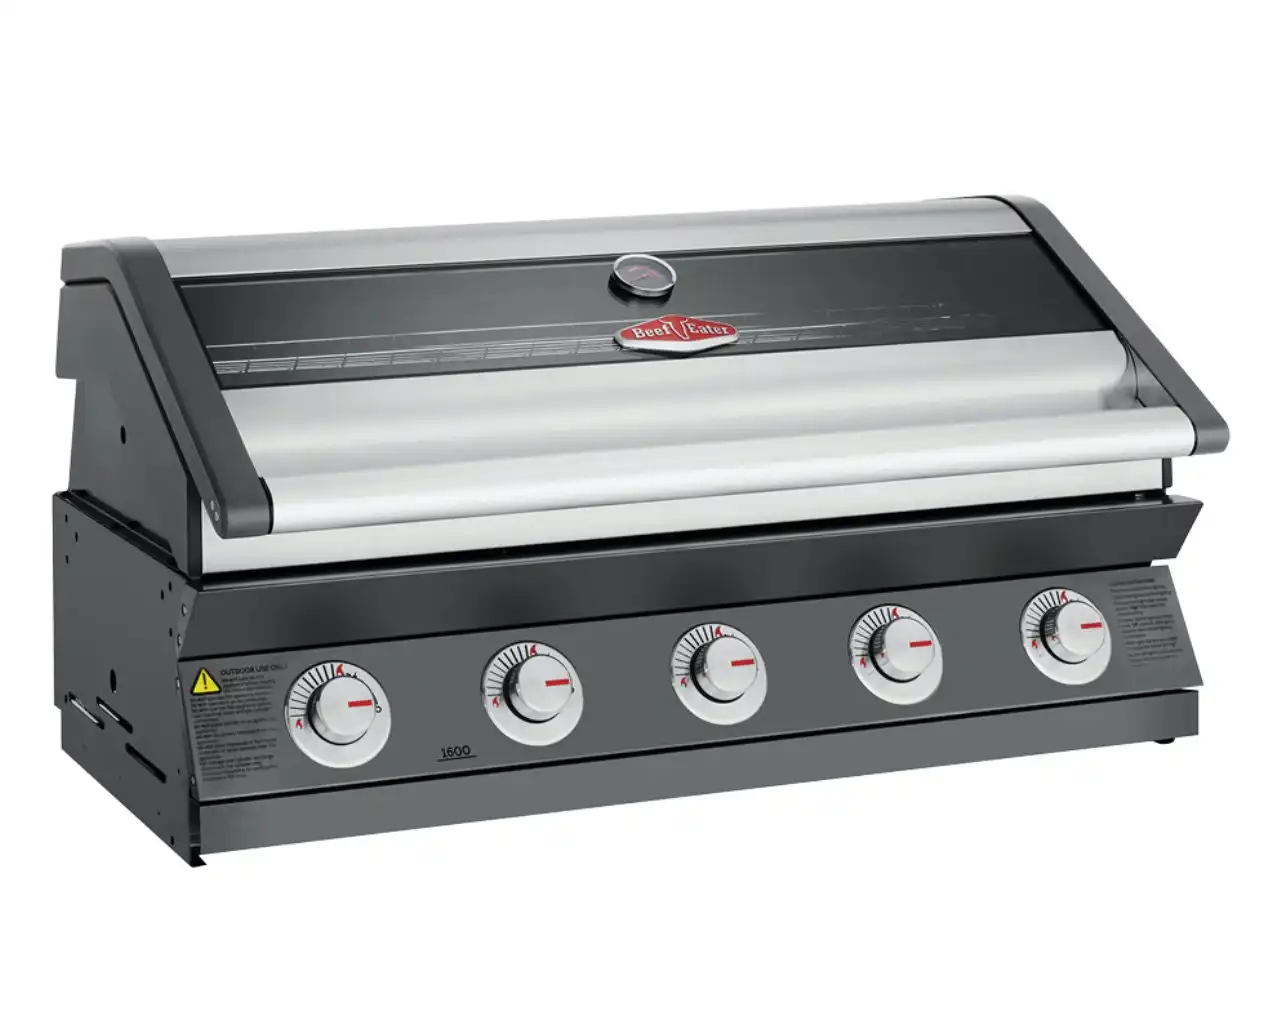 Beefeater 1600 Series 5 Burner Build In BBQ